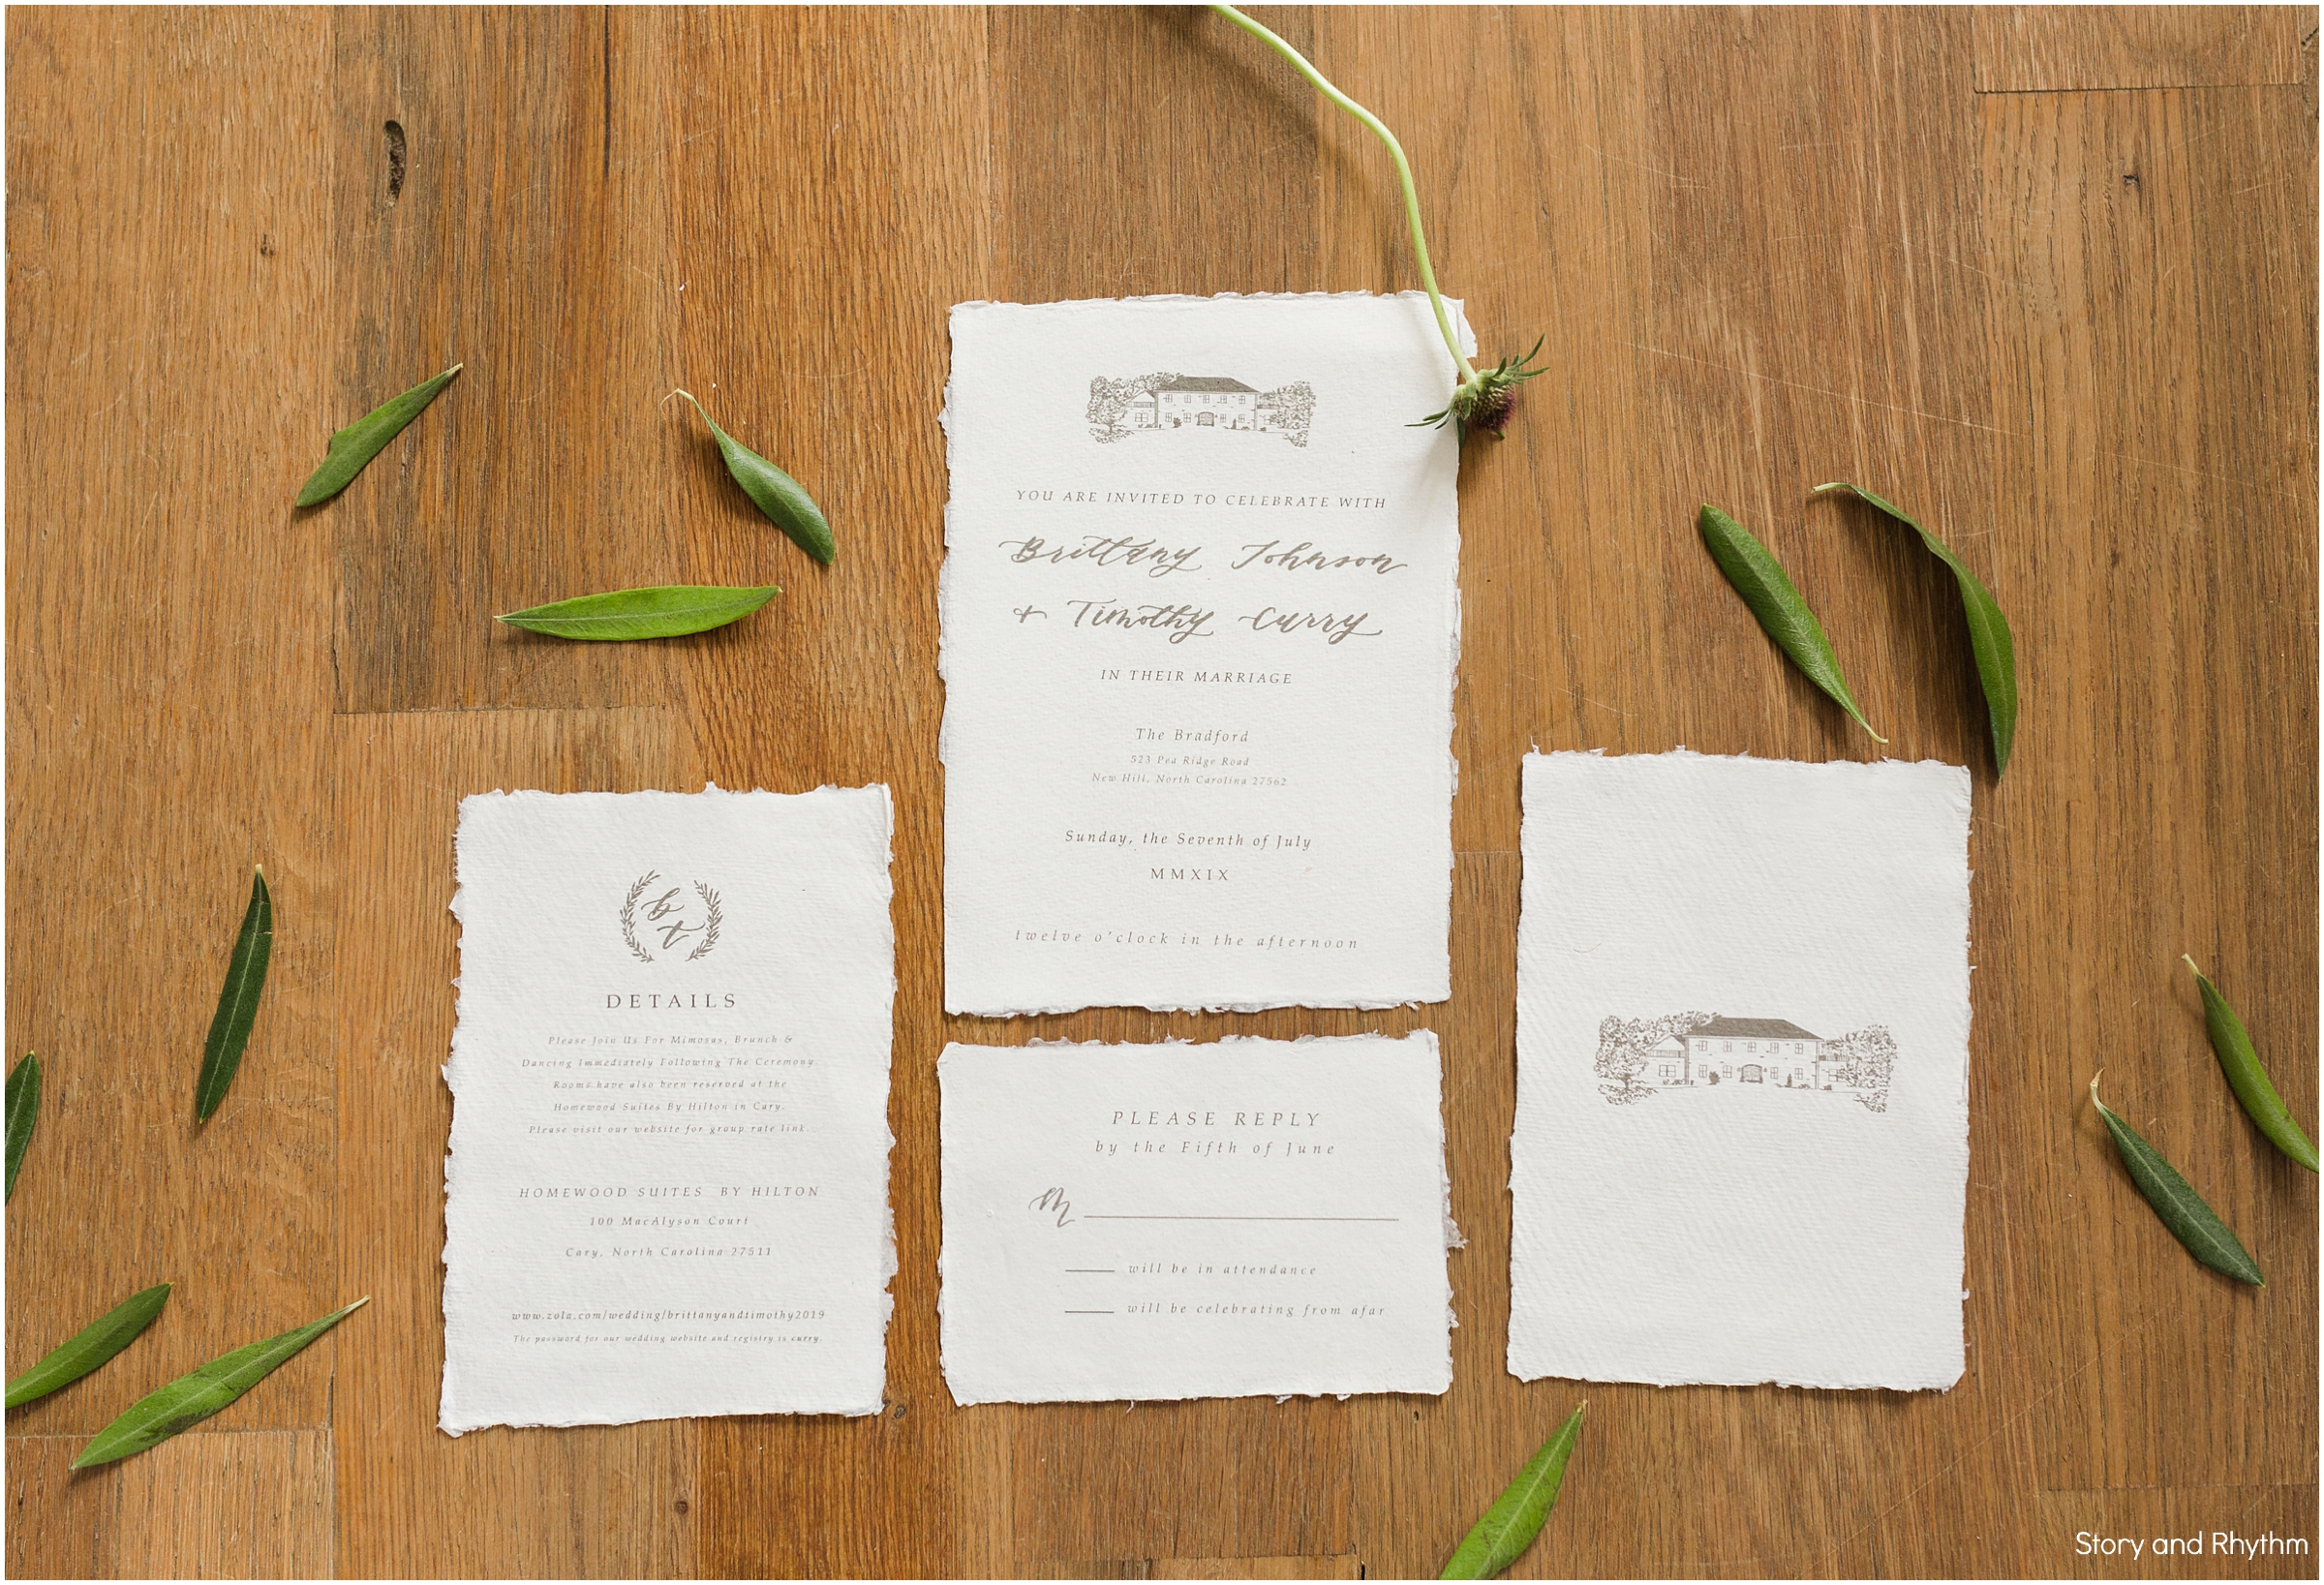 Stationary by Oaks and Gray Paper